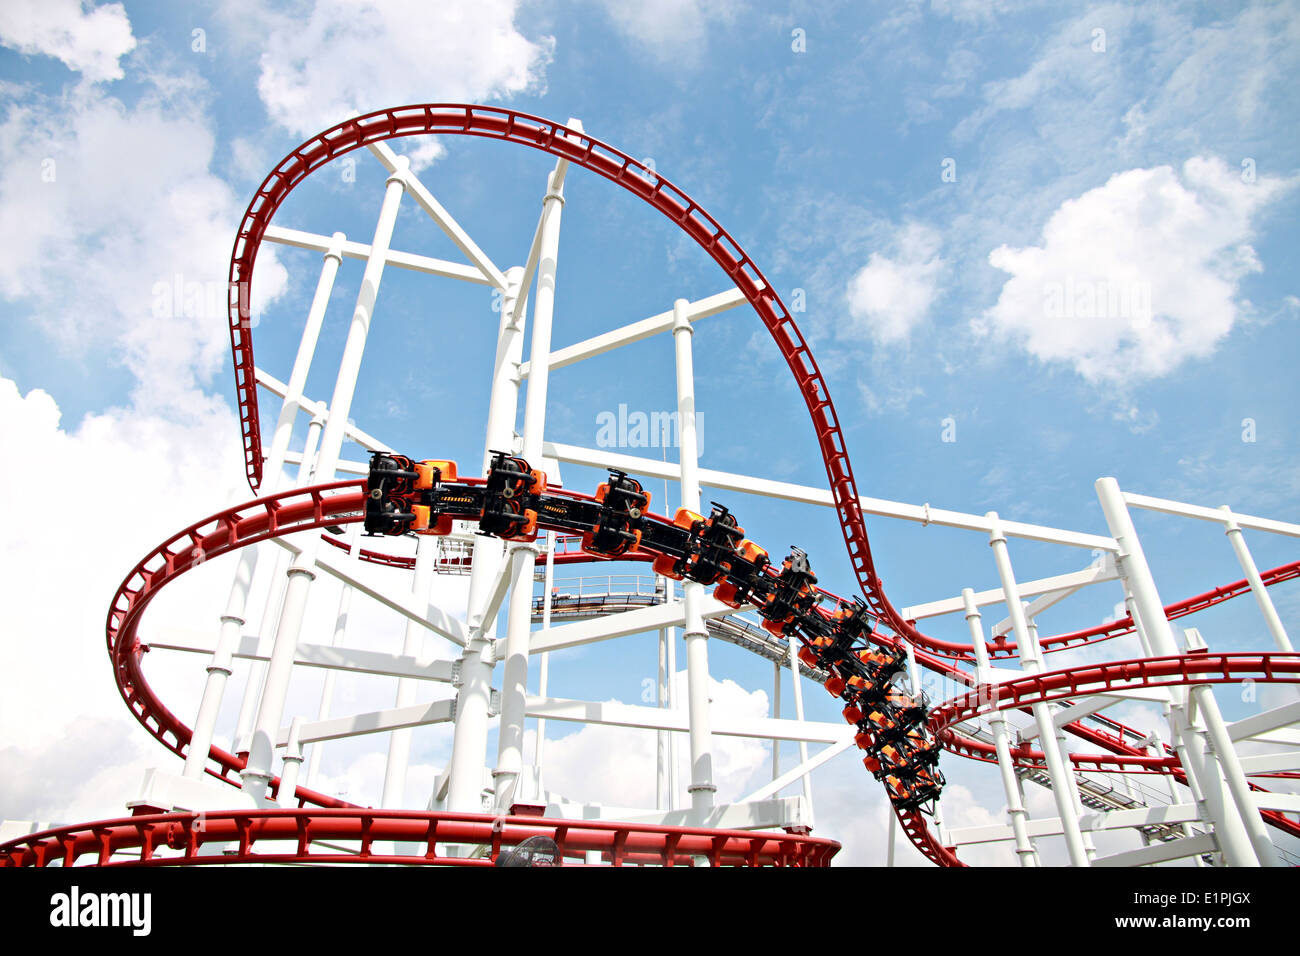 Rollercoaster against blue sky in amusement park. Stock Photo